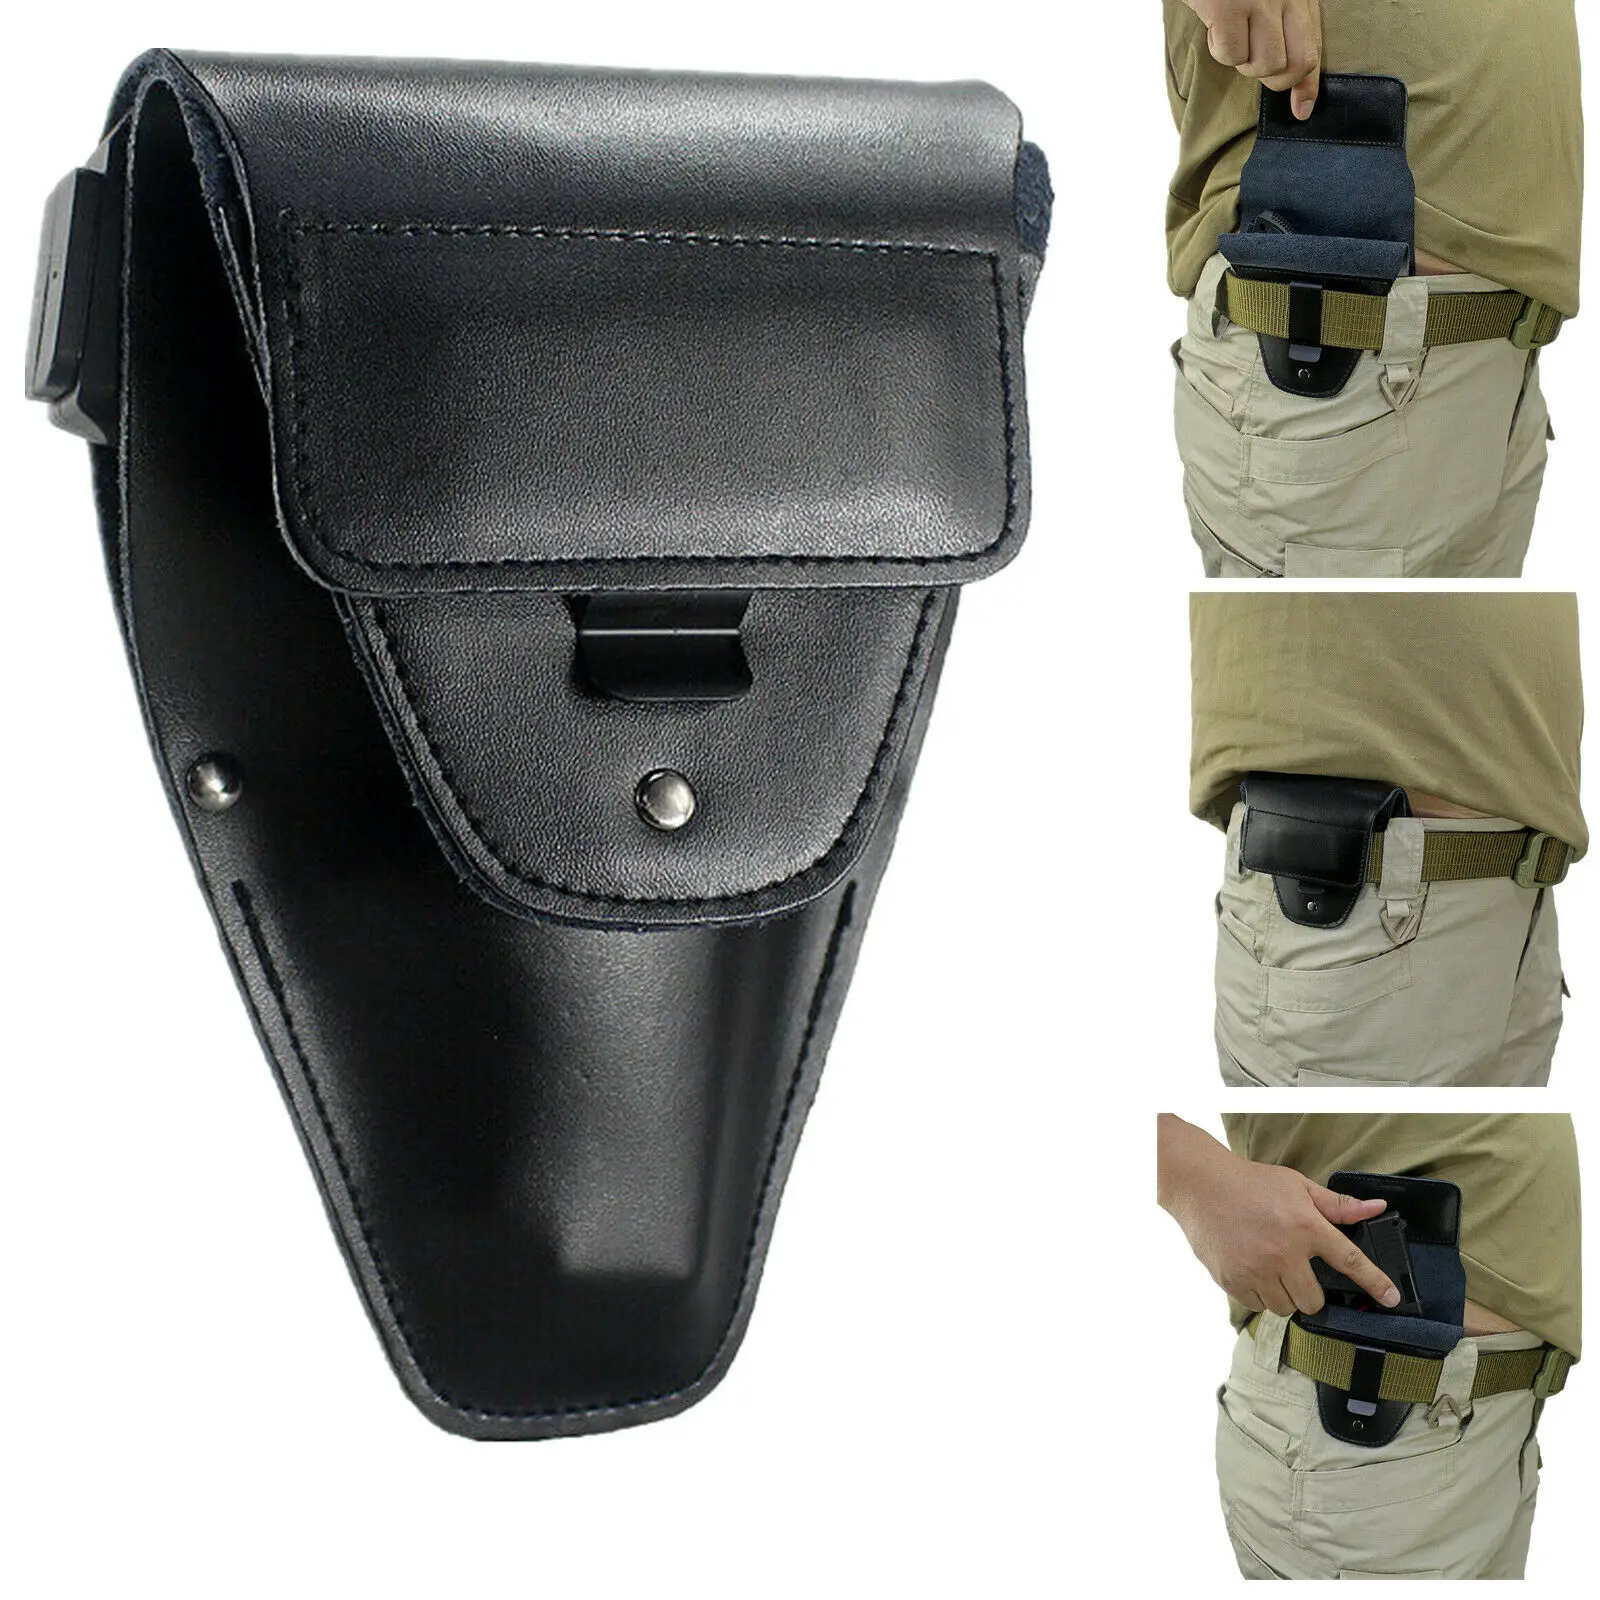 

Hunting Tactical IWB Leather Holster Concealed Carry Waistband Gun Holster Pouch for Compact or Subcompact Medium Pistol Pocket